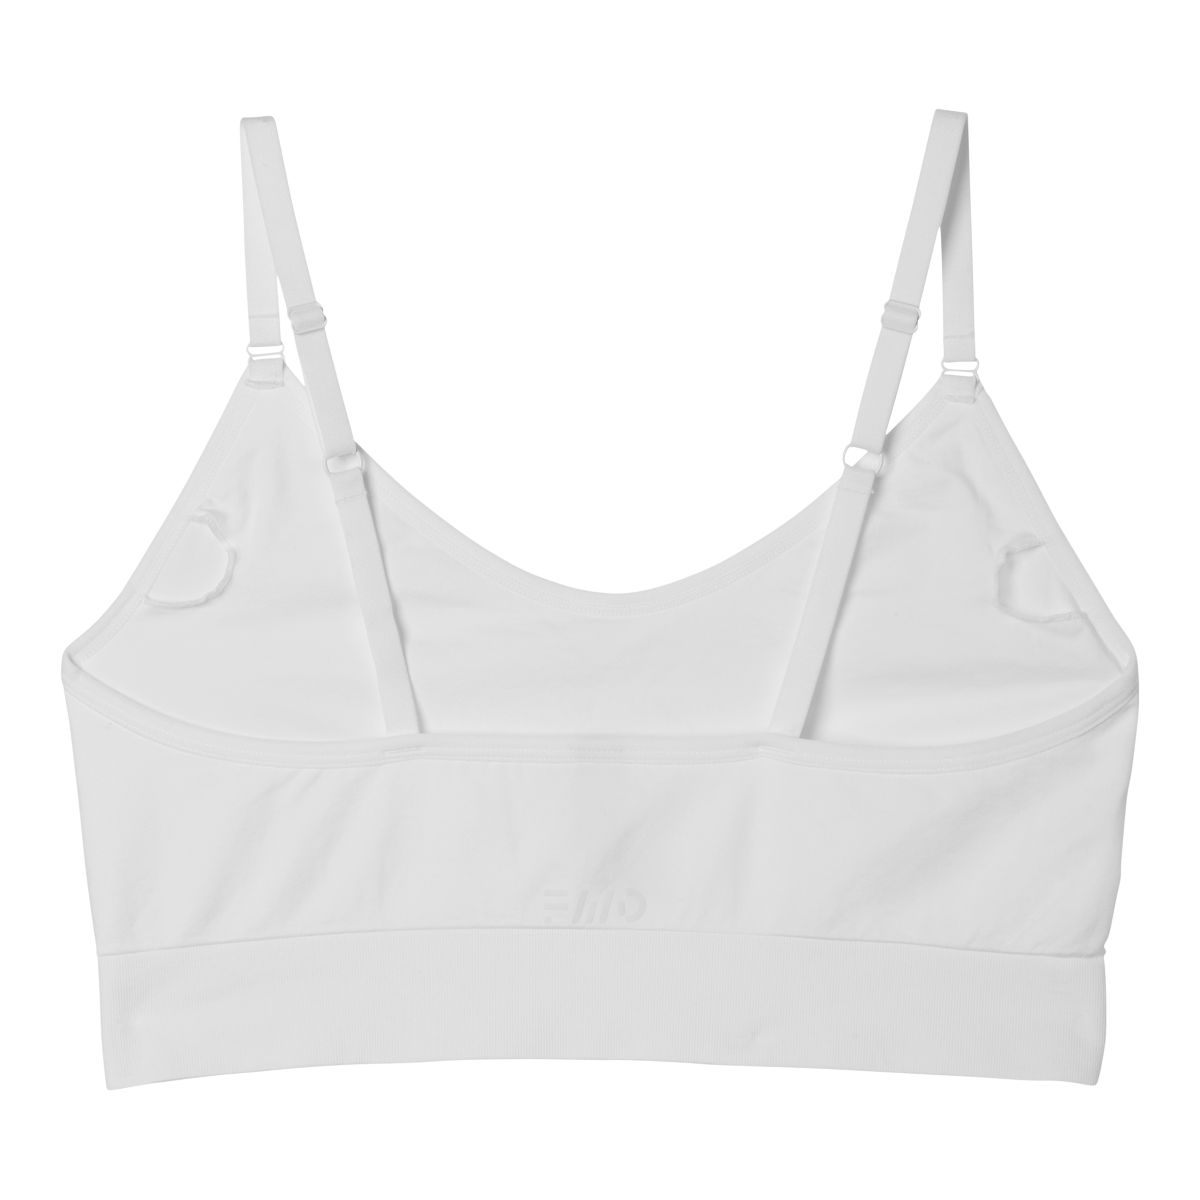 https://media-www.sportchek.ca/product/div-03-softgoods/dpt-70-athletic-clothing/sdpt-02-womens/333593616/fwd-w-core-seamless-low-bra-bb5852e6-2e87-4696-bebc-16ff6d79a187-jpgrendition.jpg?imdensity=1&imwidth=1244&impolicy=mZoom